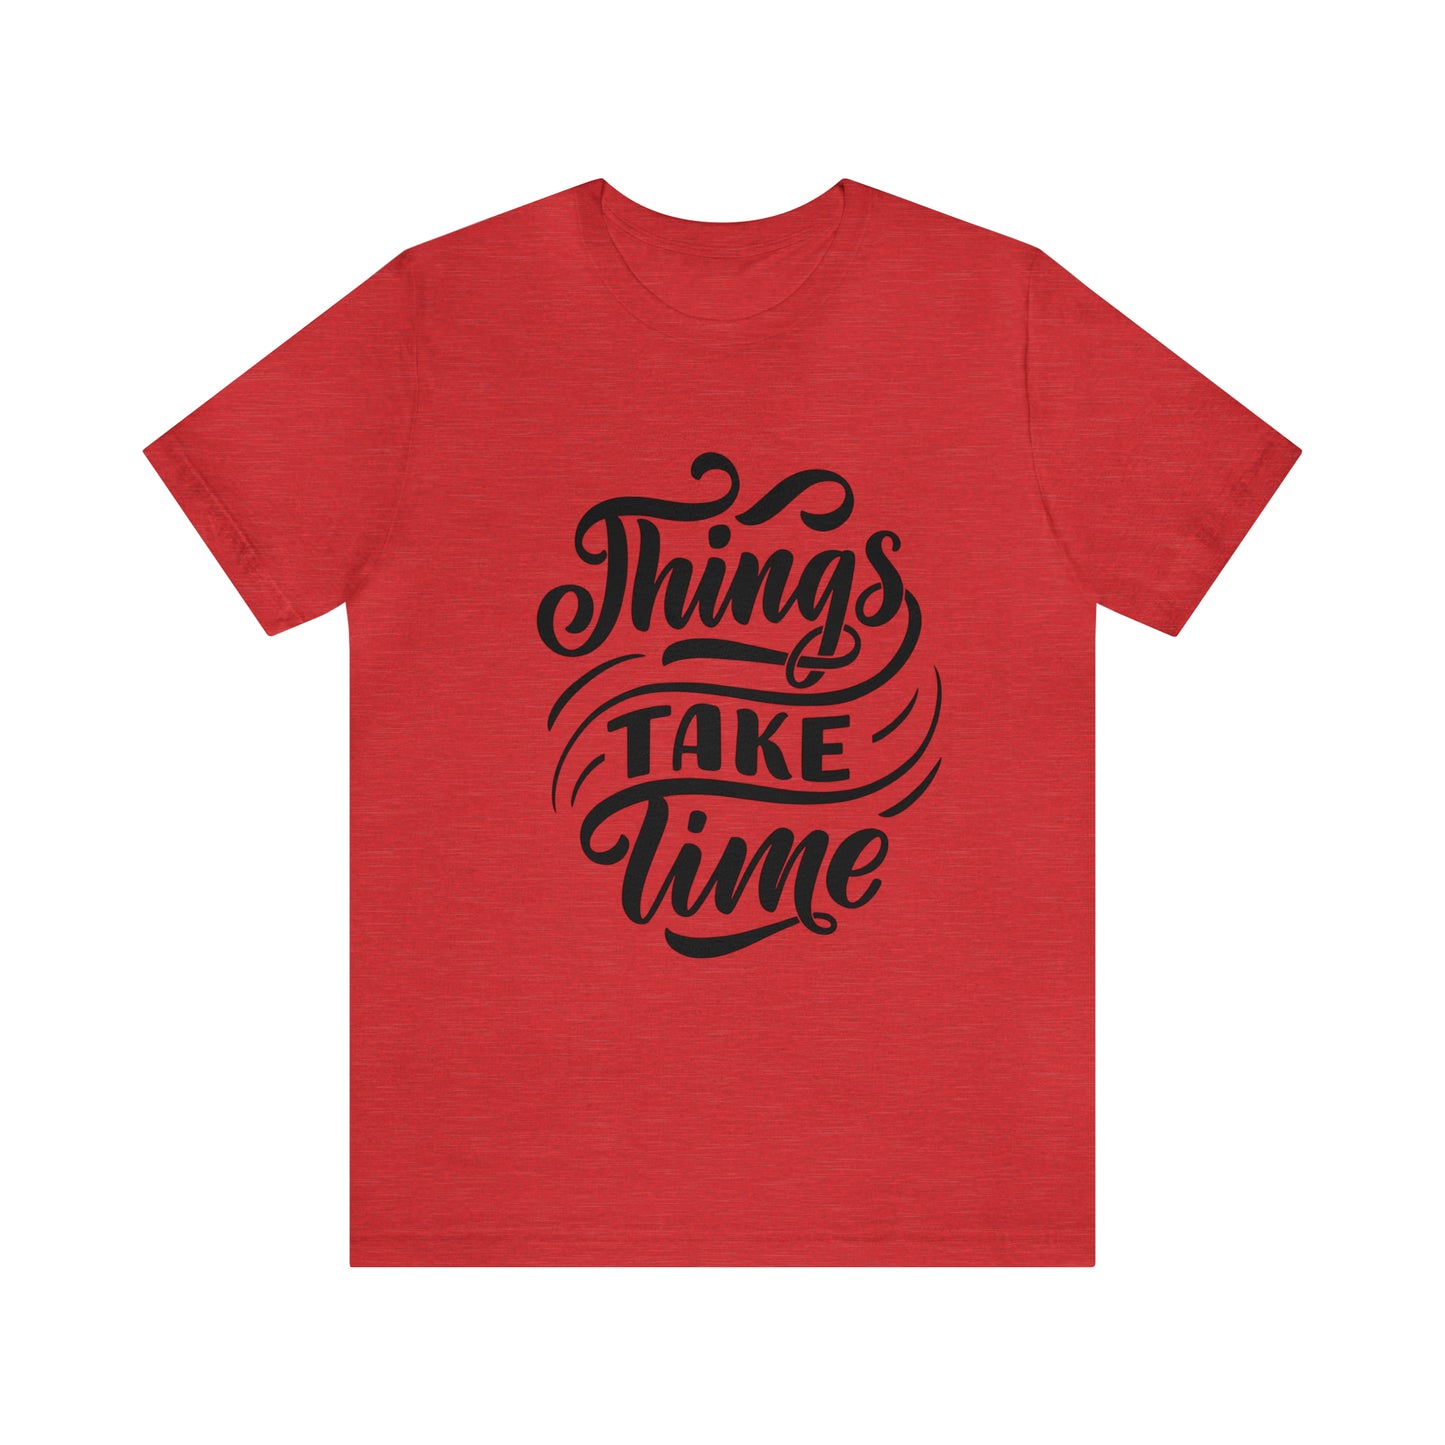 Lvad Tribe Things Take Time Unisex Jersey Short Sleeve Tee